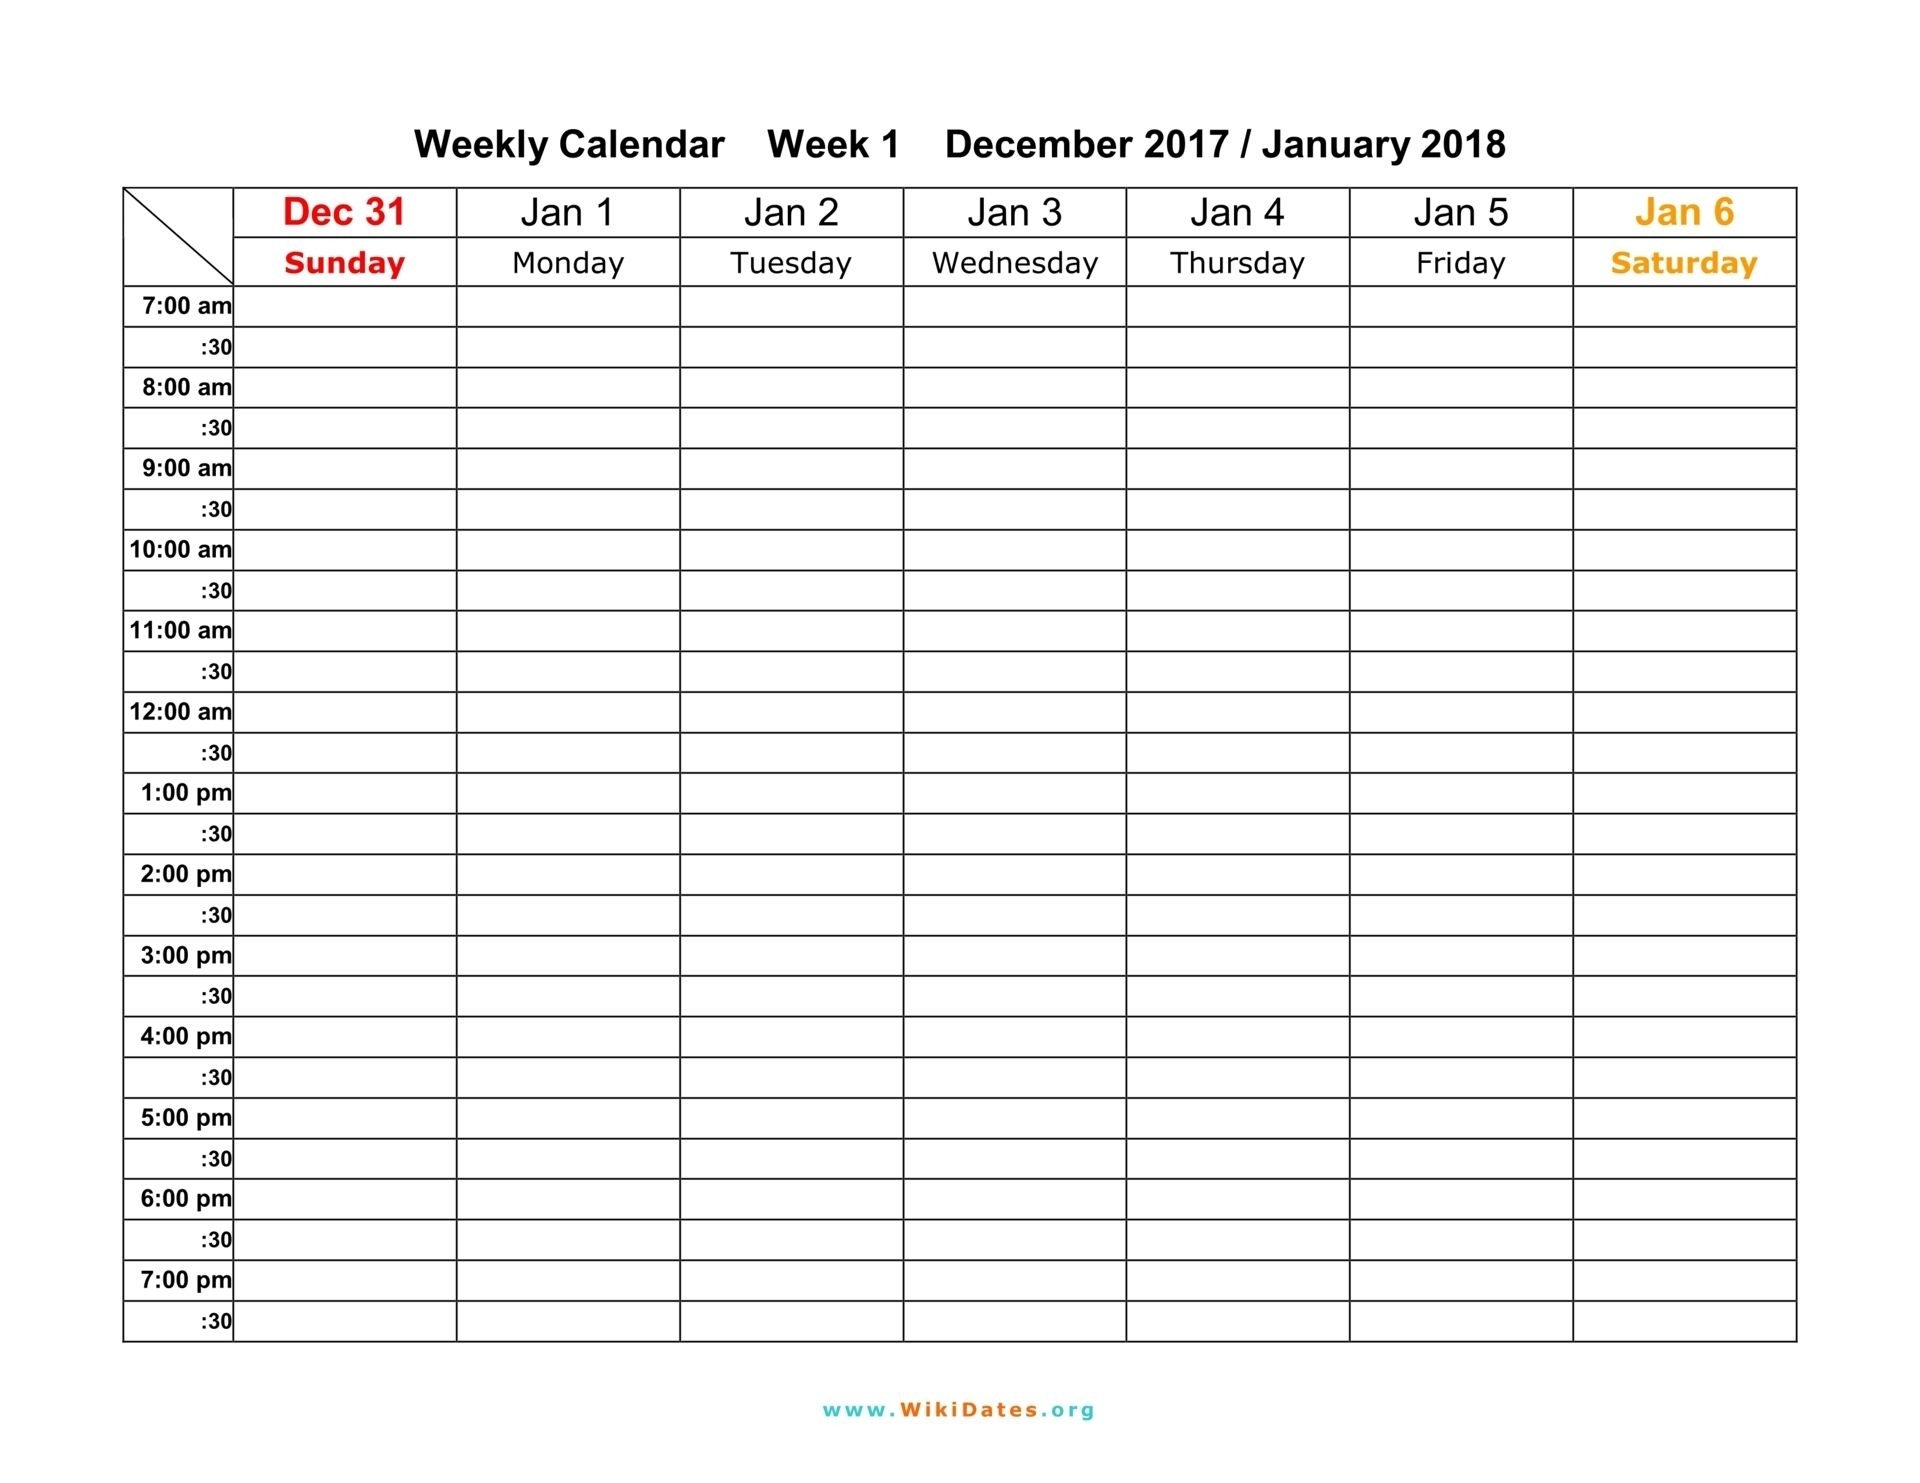 Collect Am Pm Weekly Calendar